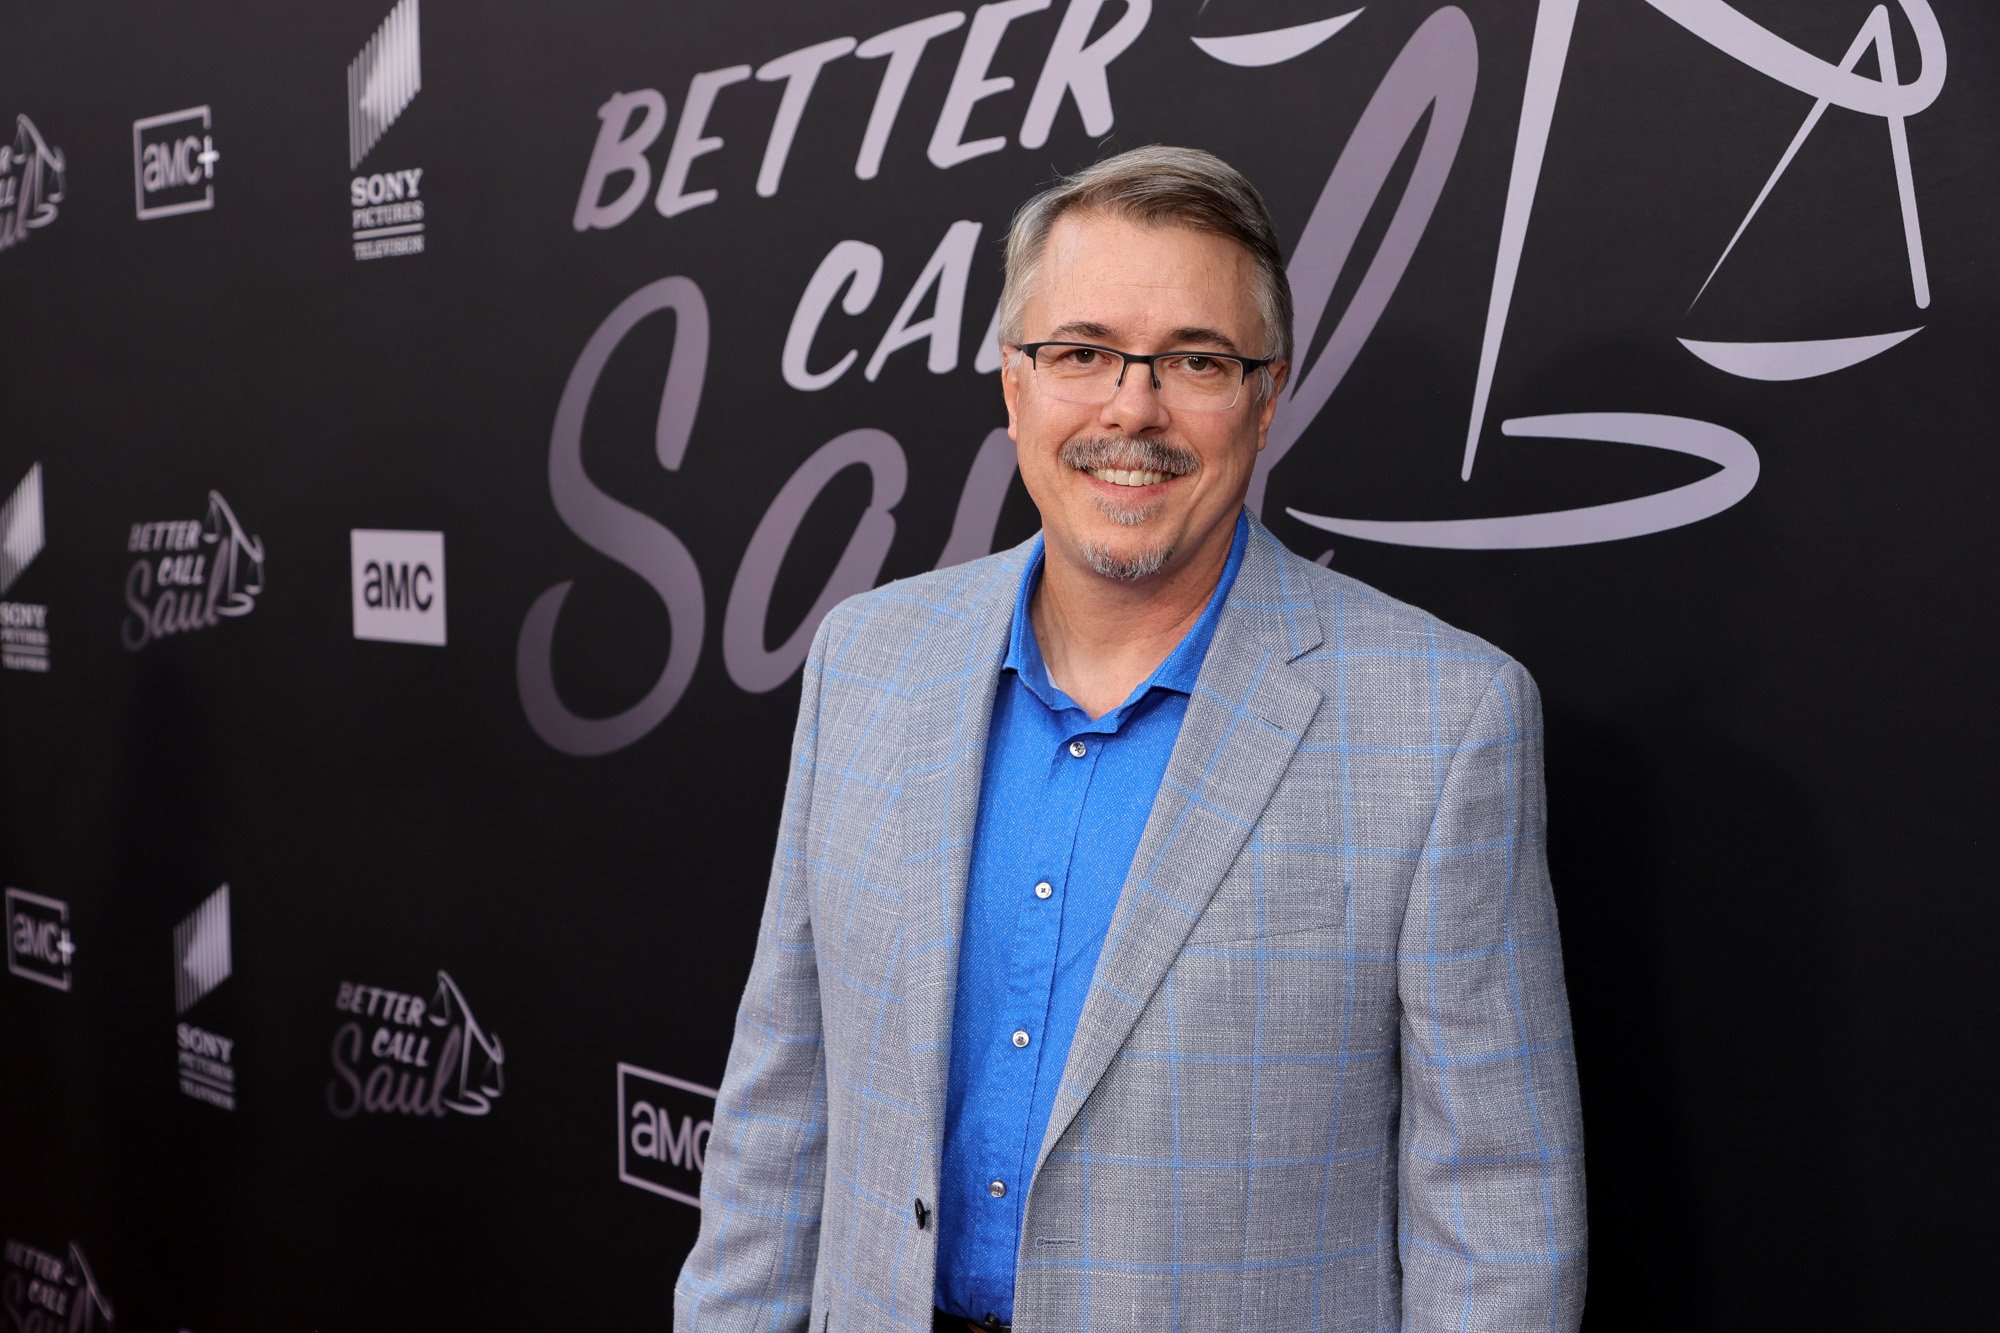 'Breaking Bad' and 'Better Call Saul' creator Vince Gilligan. He's wearing a grey suit and walking the red carpet for the 'Better Call Saul' Season 6 premiere.